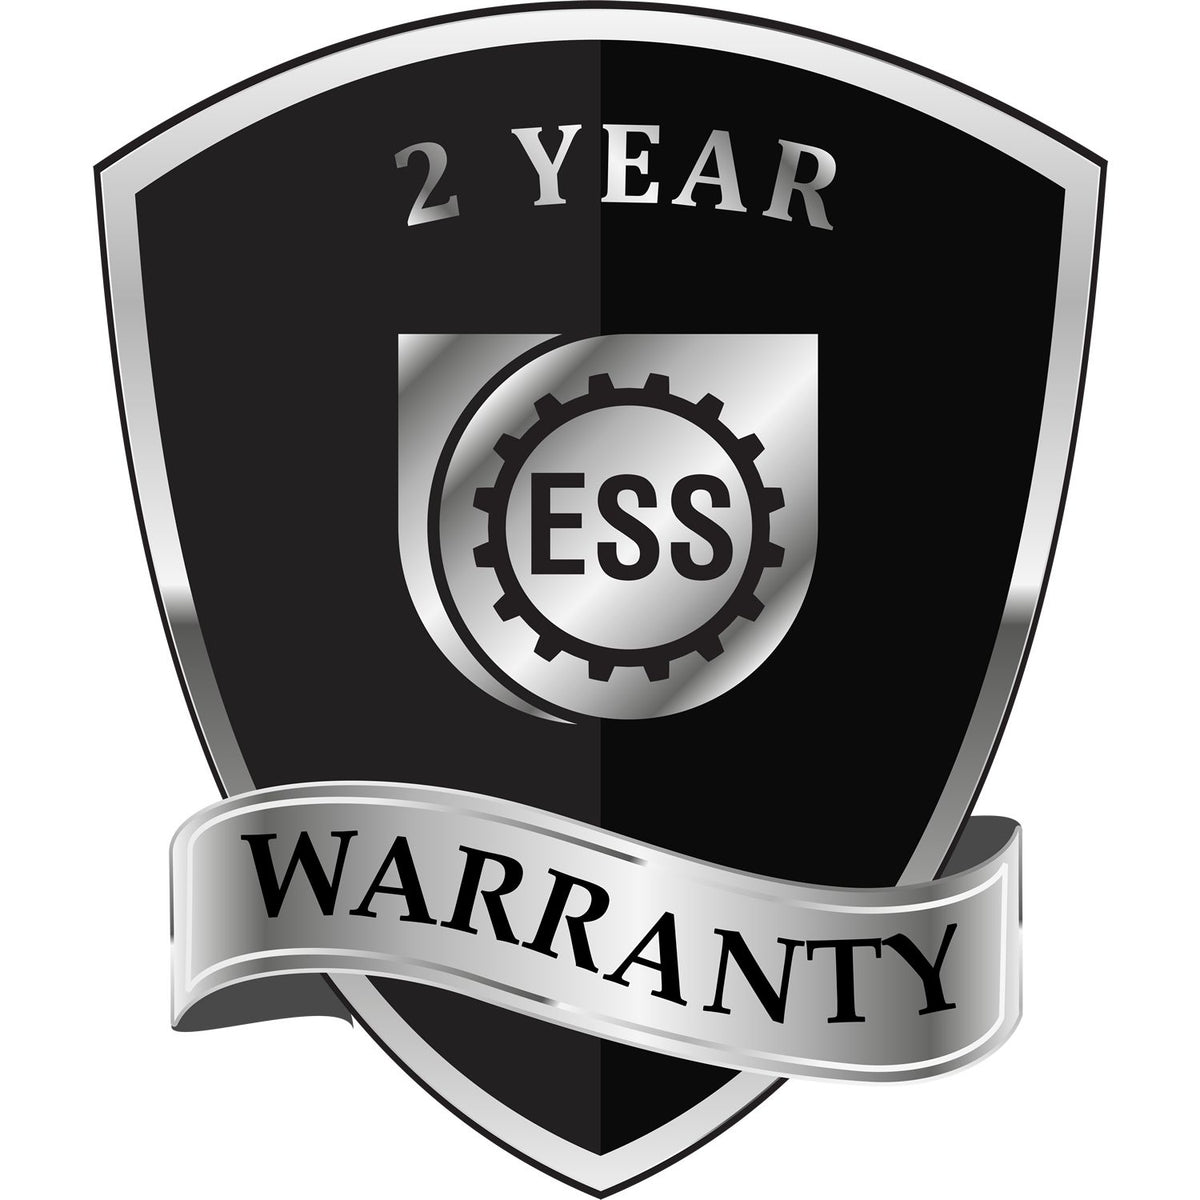 A badge or emblem showing a warranty icon for the Heavy Duty Cast Iron North Dakota Engineer Seal Embosser